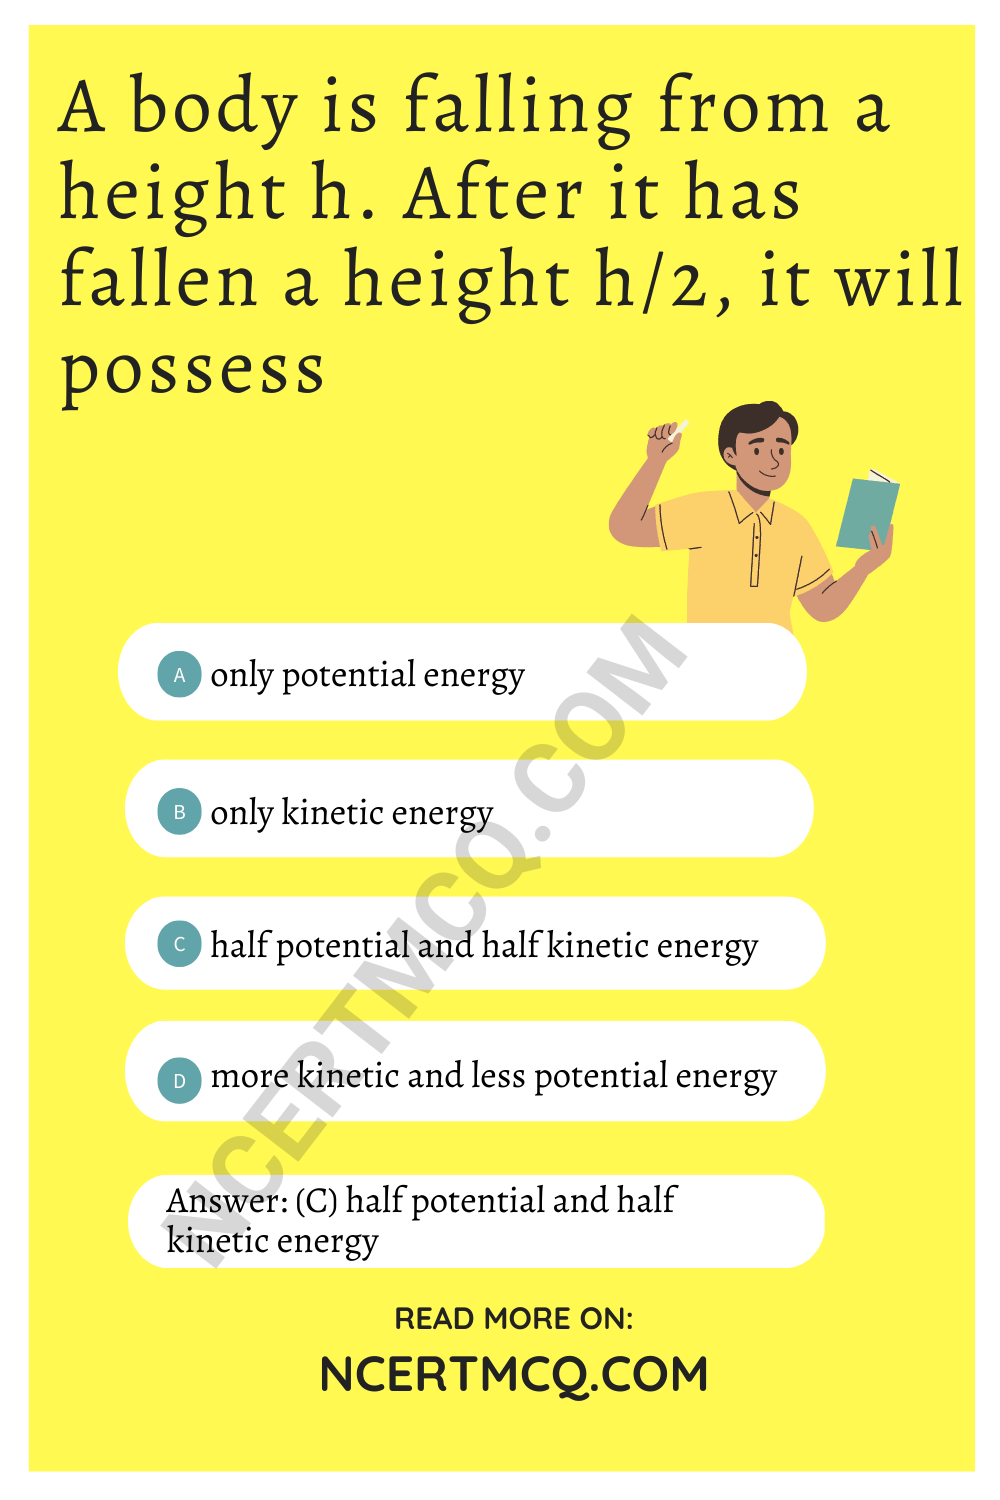 A body is falling from a height h. After it has fallen a height h/2, it will possess